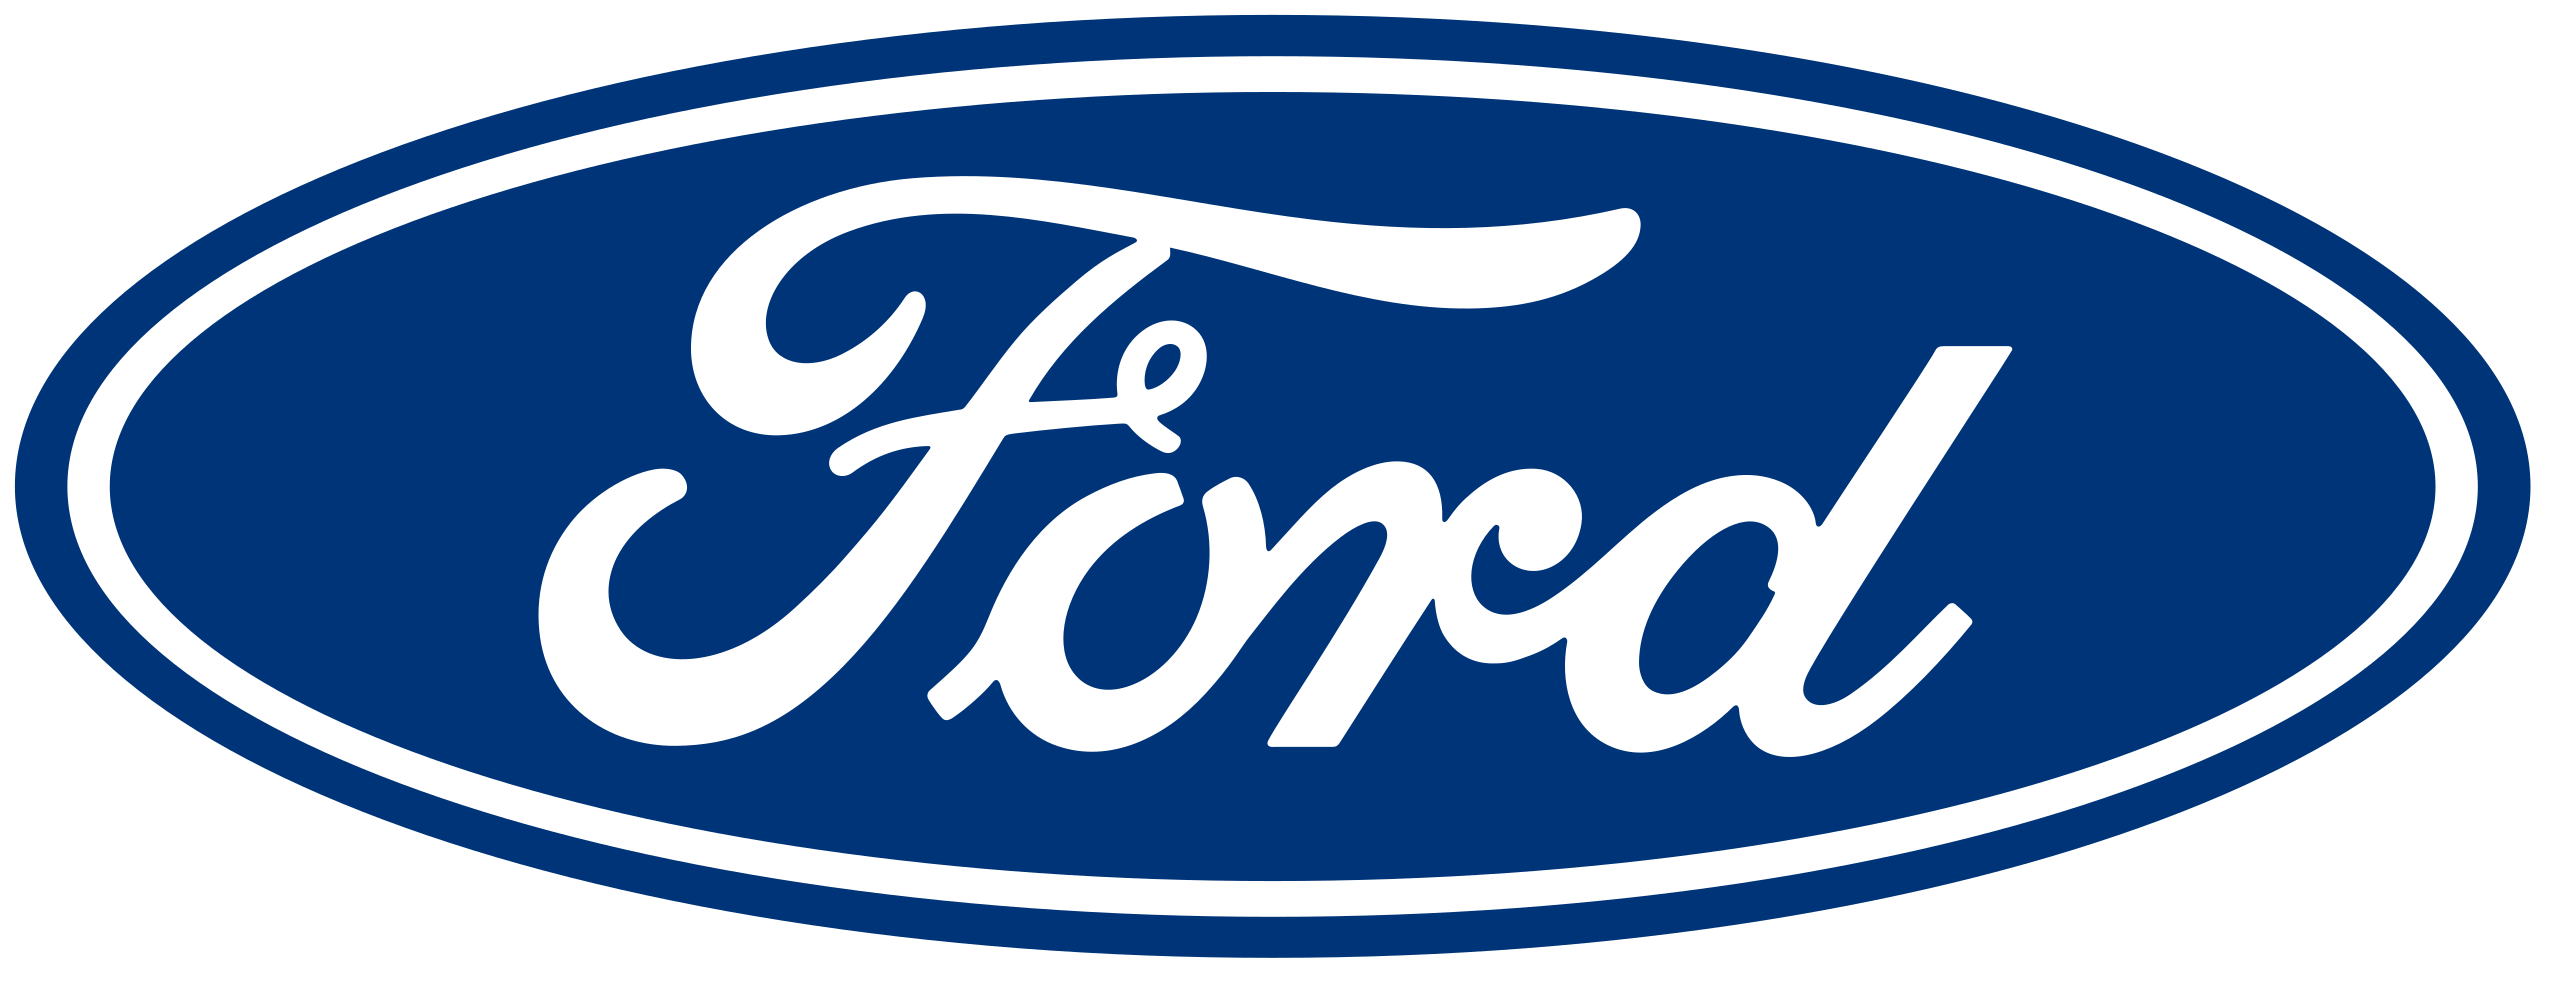 The Ford logo